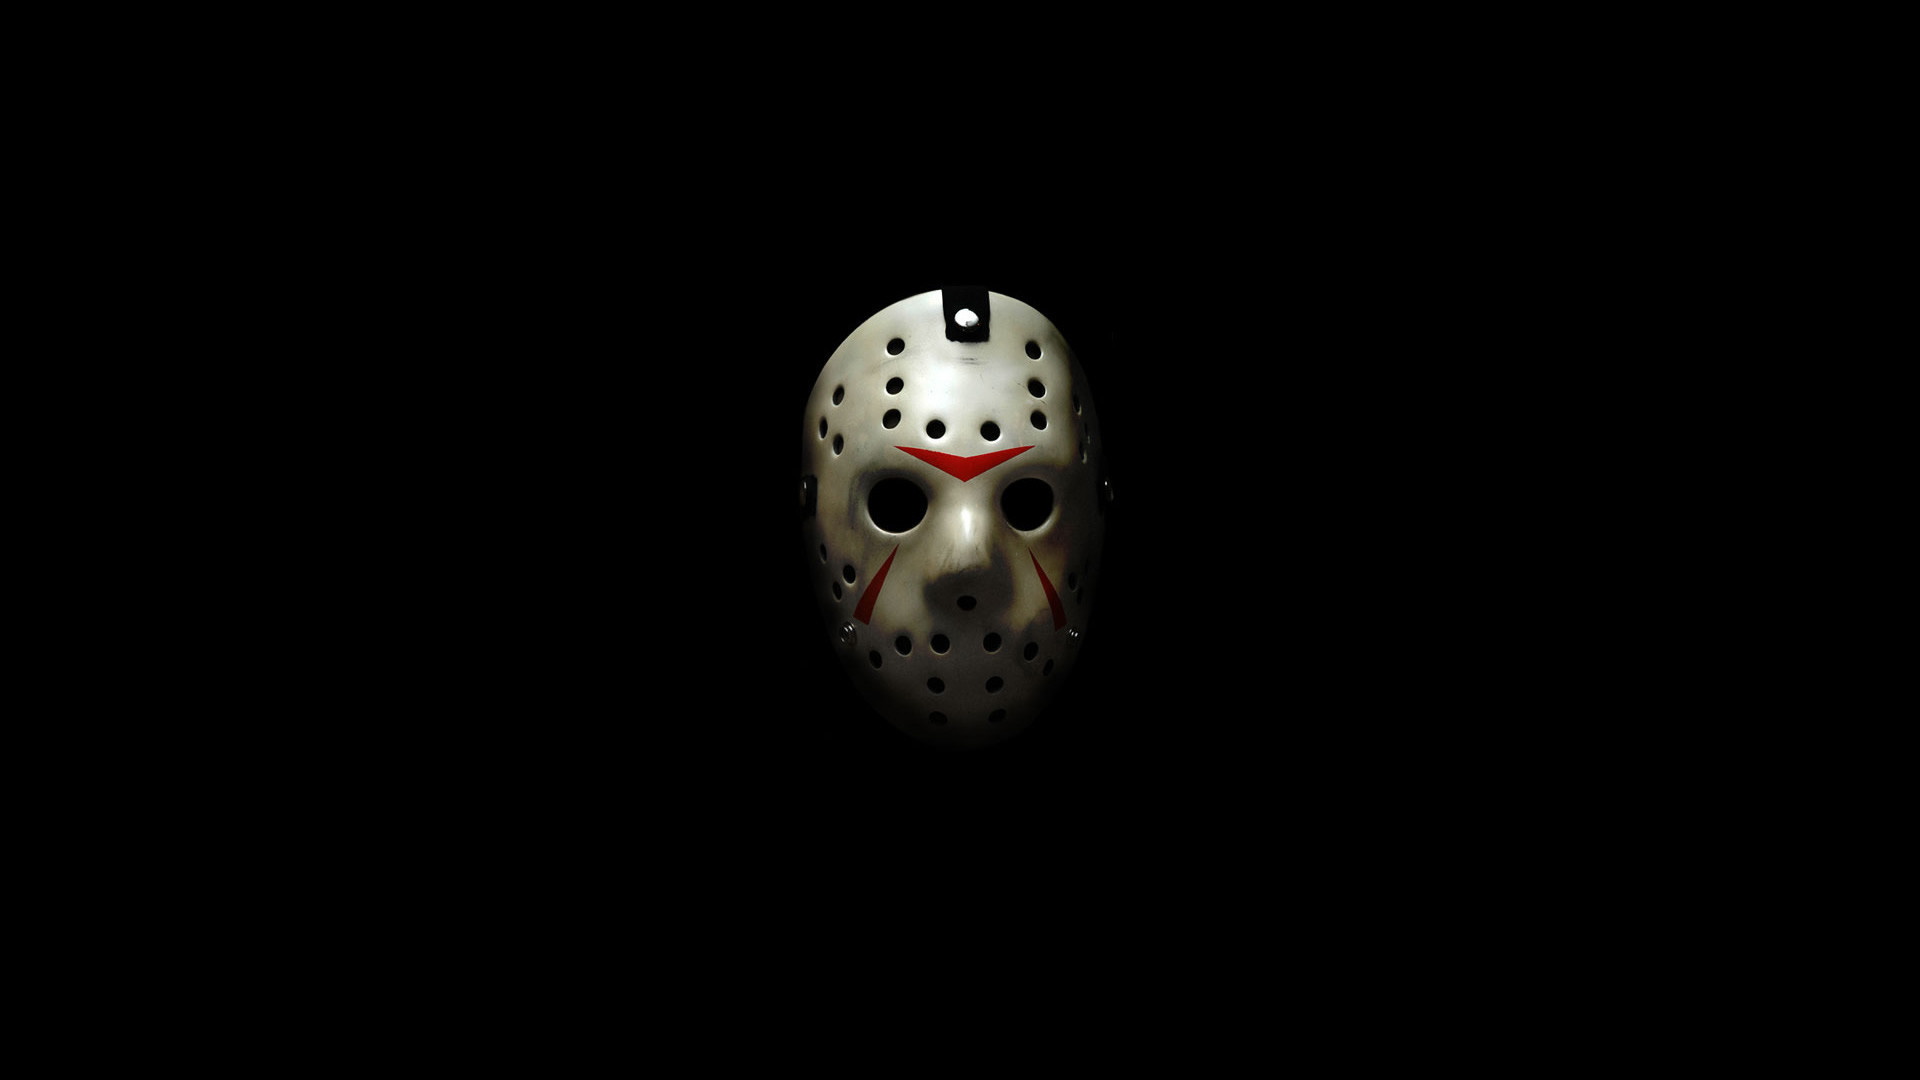 1920x1080 3840x2160 0 43454 jason voorhees mask friday the 13th  movie 4K  Ultra HD Jason voorhees Wallpapers HD, Desktop Backgrounds